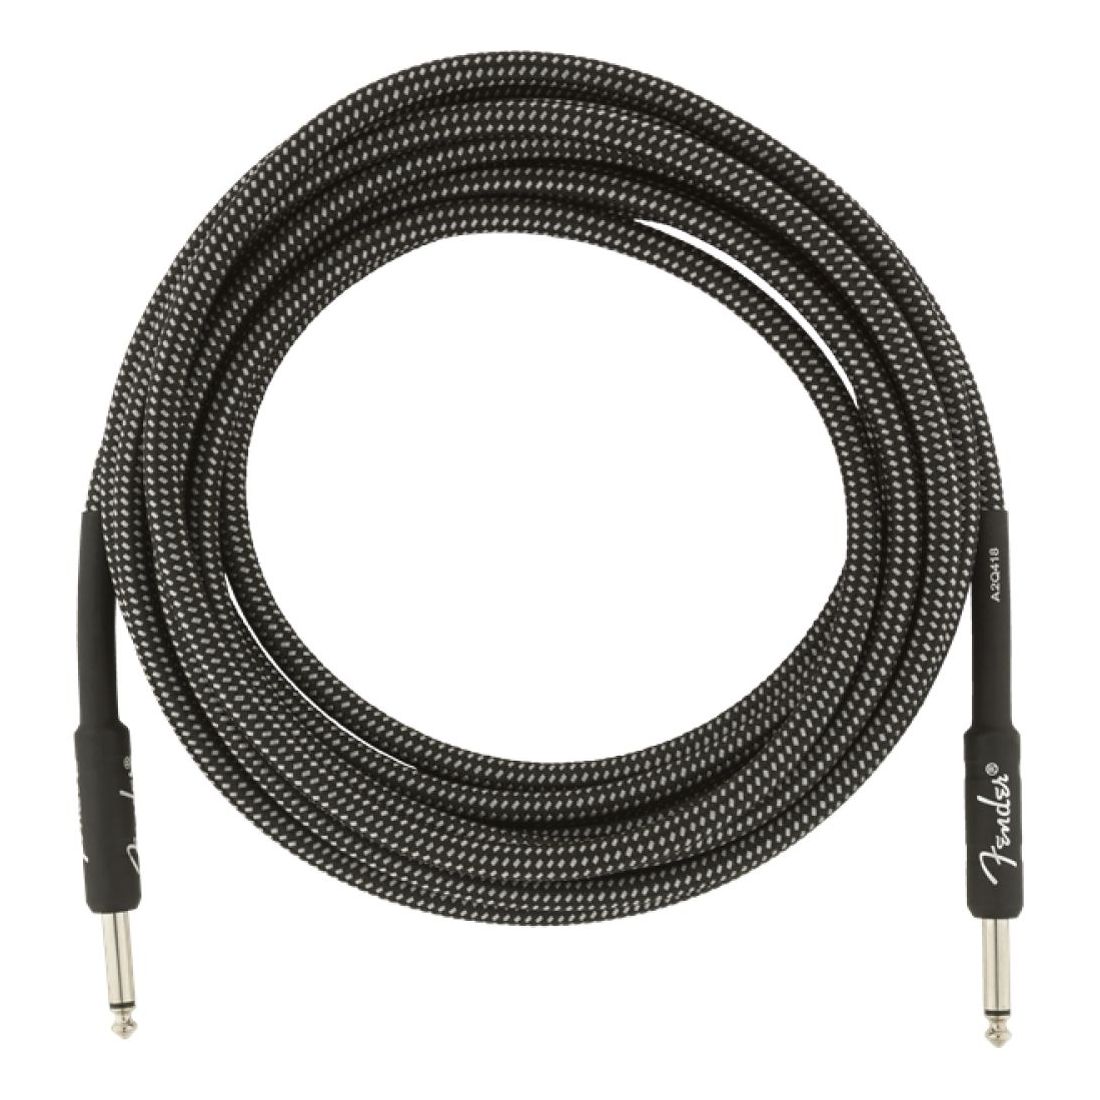 Fender Professional Series Instrument Cable Tweed 15 Ft